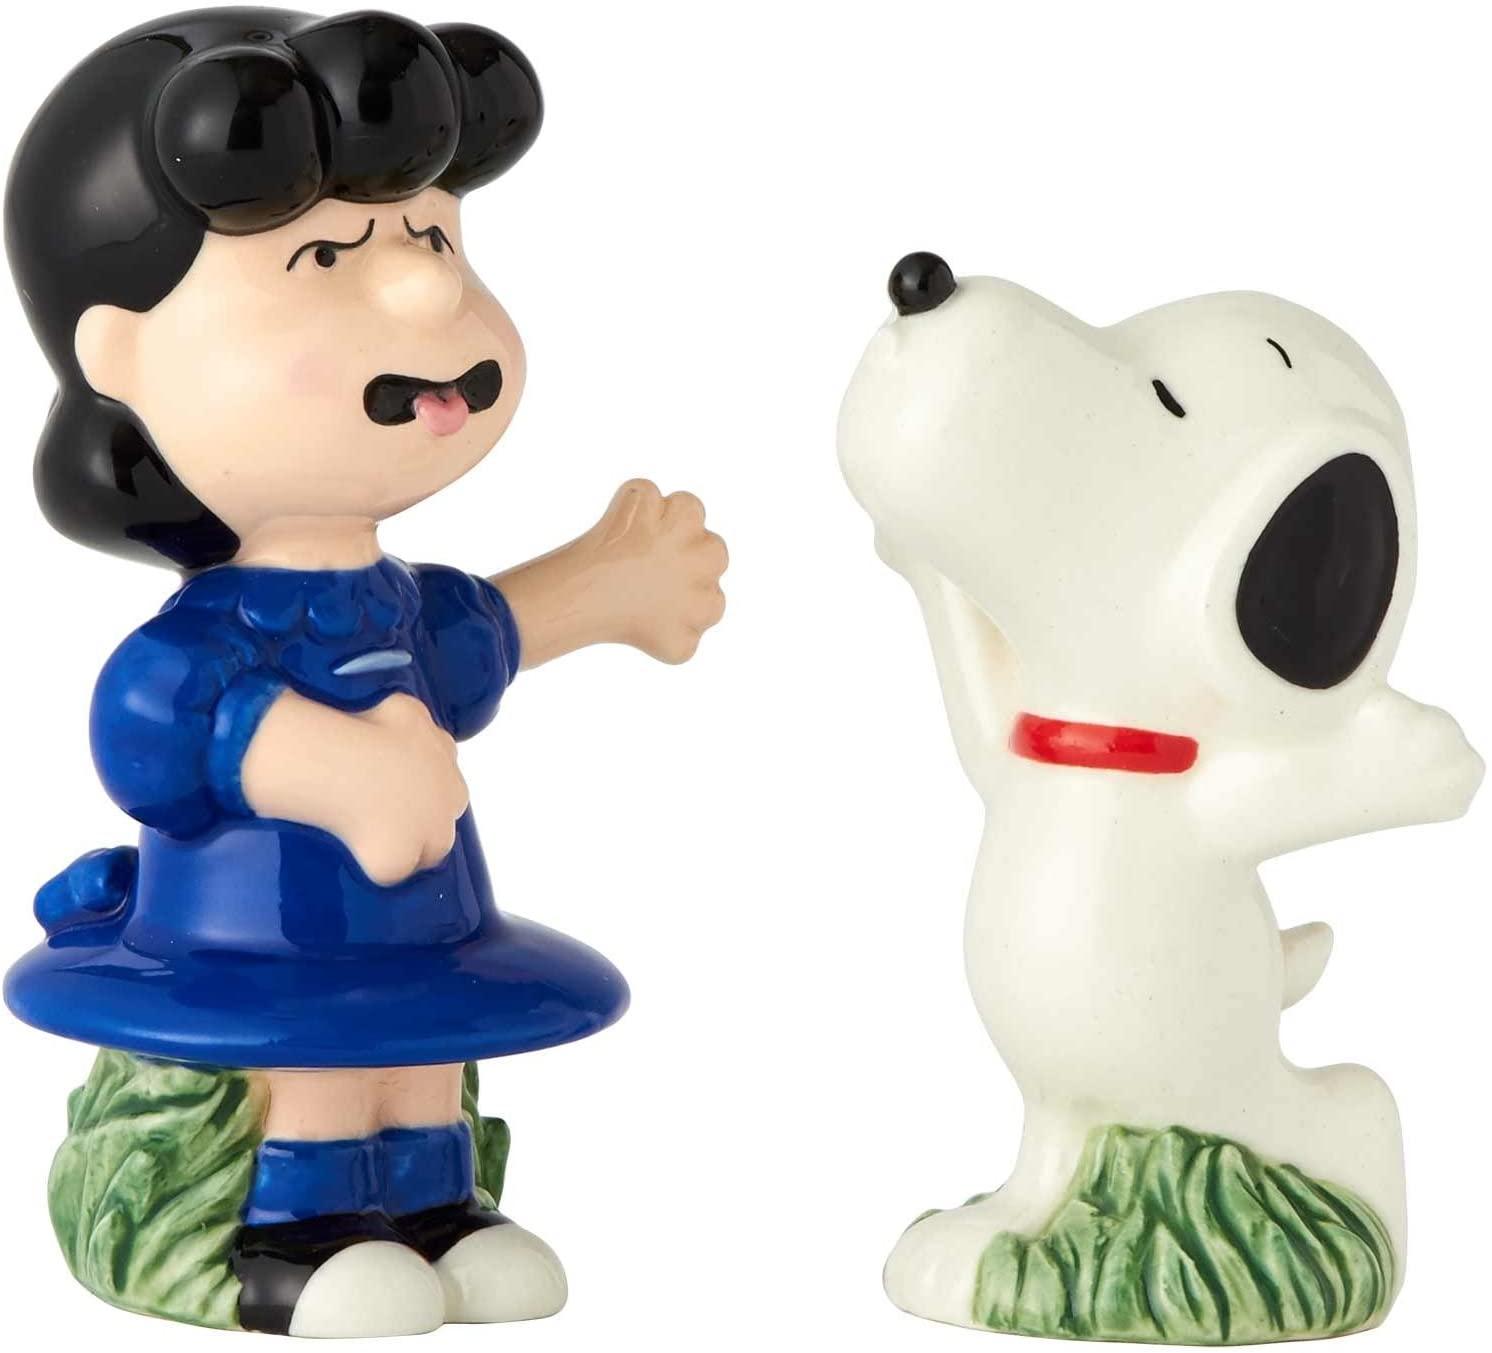 Peanuts Snoopy and Lucy Salt and Pepper Shakers